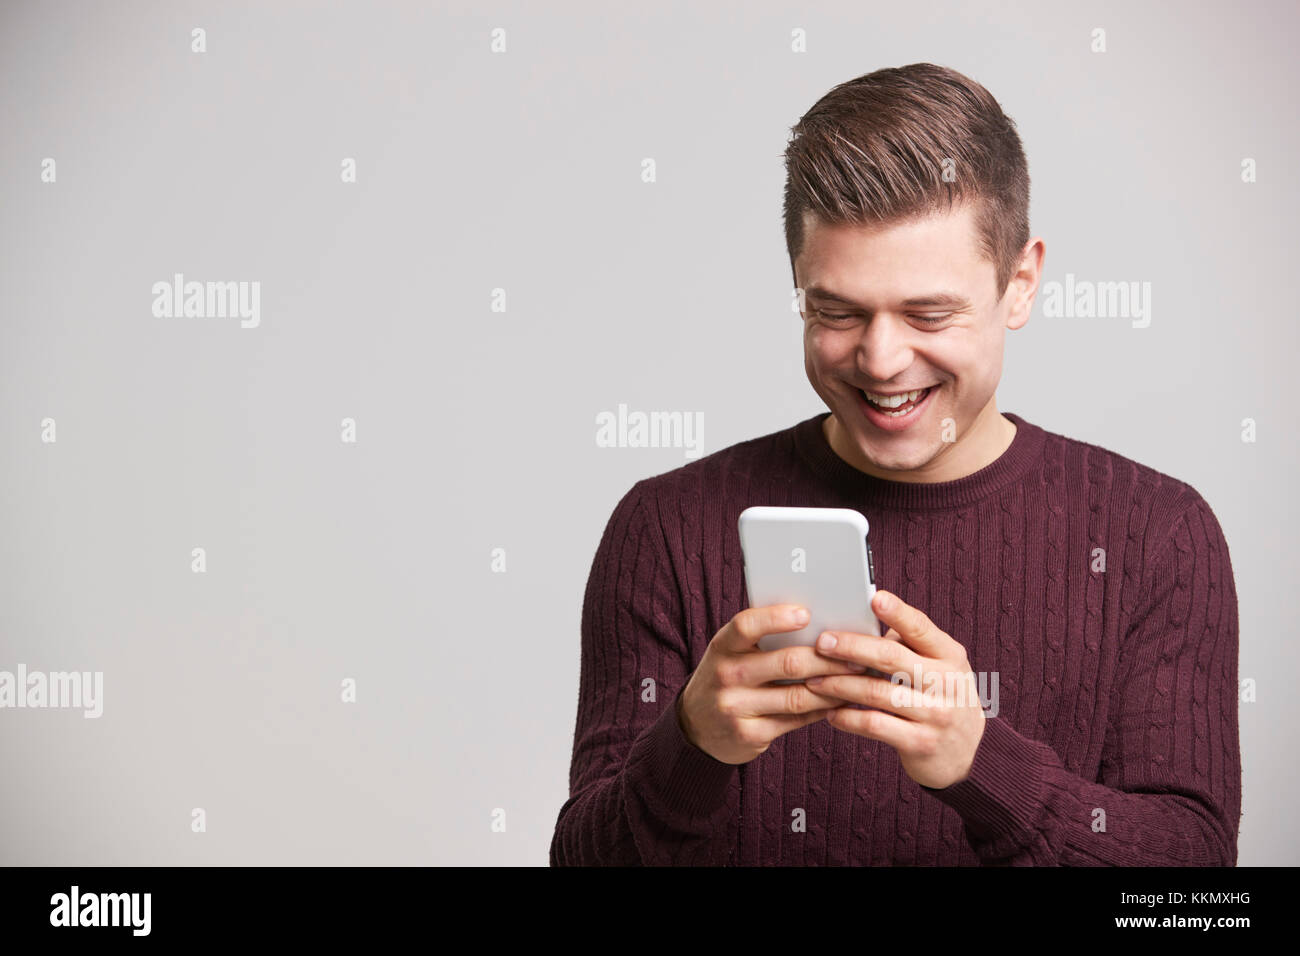 Portrait of a laughing young white man using a smartphone Stock Photo